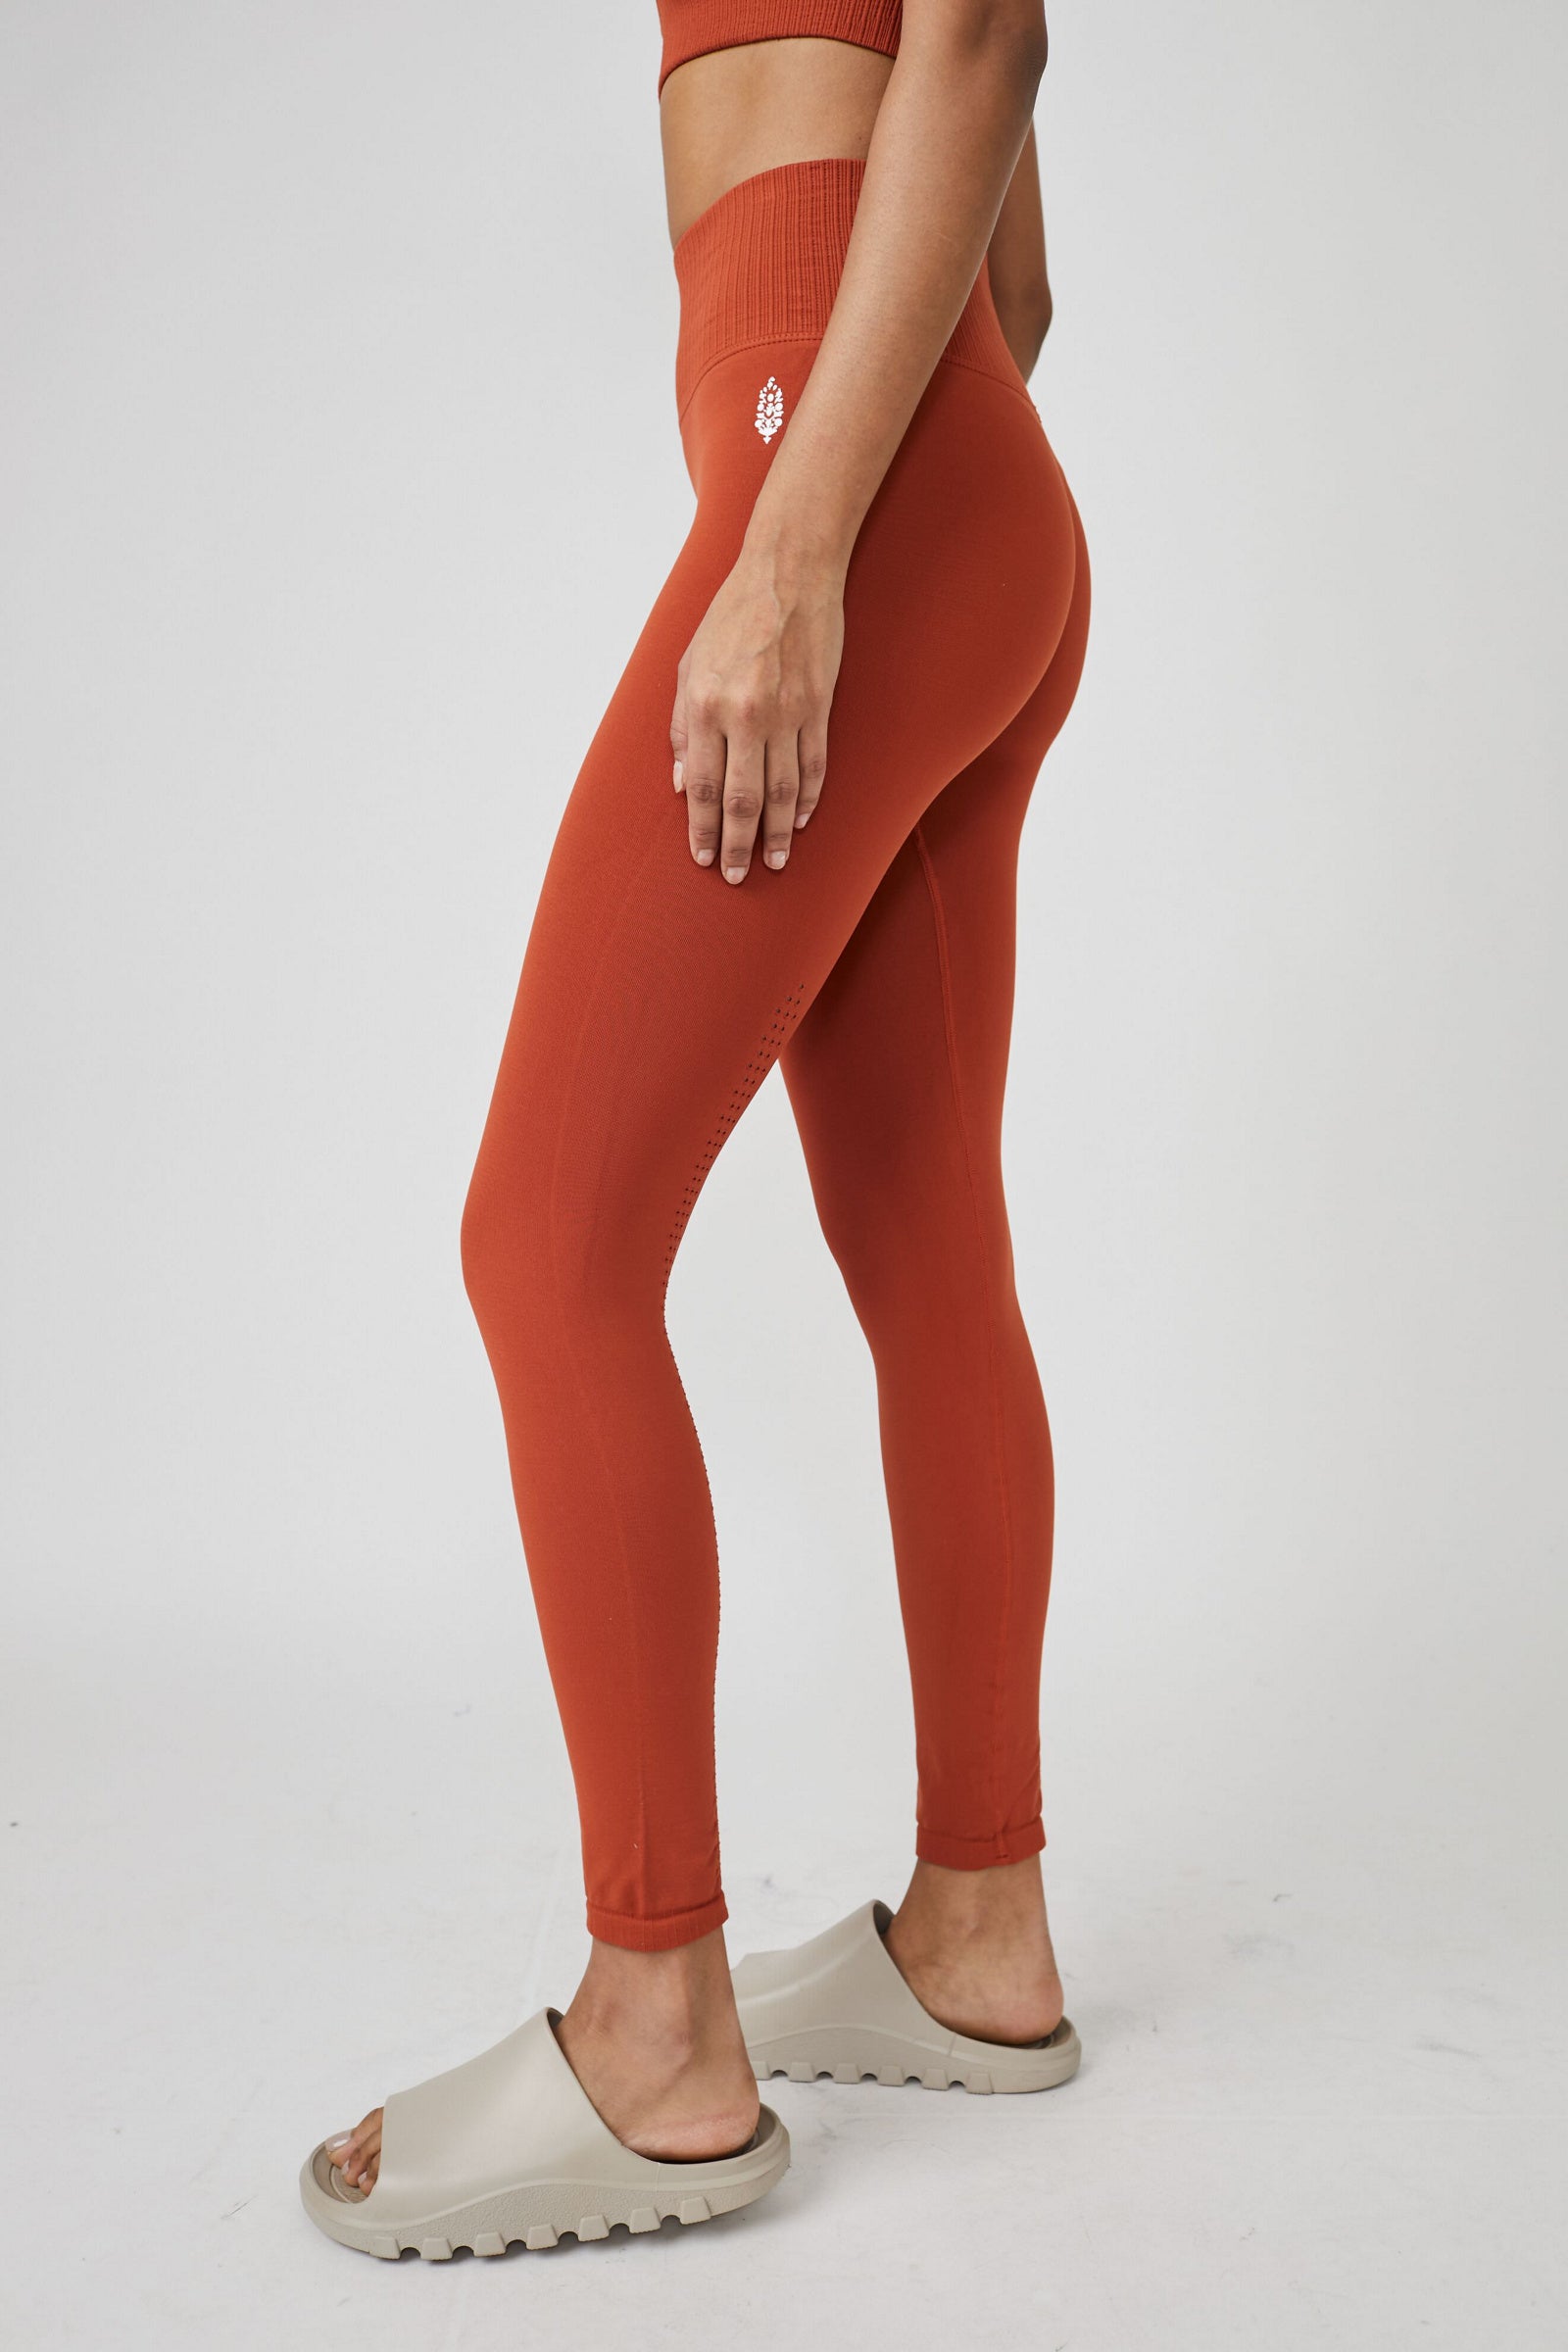 Free People Movement Good Karma Leggings Size undefined - $39 - From Nagwat